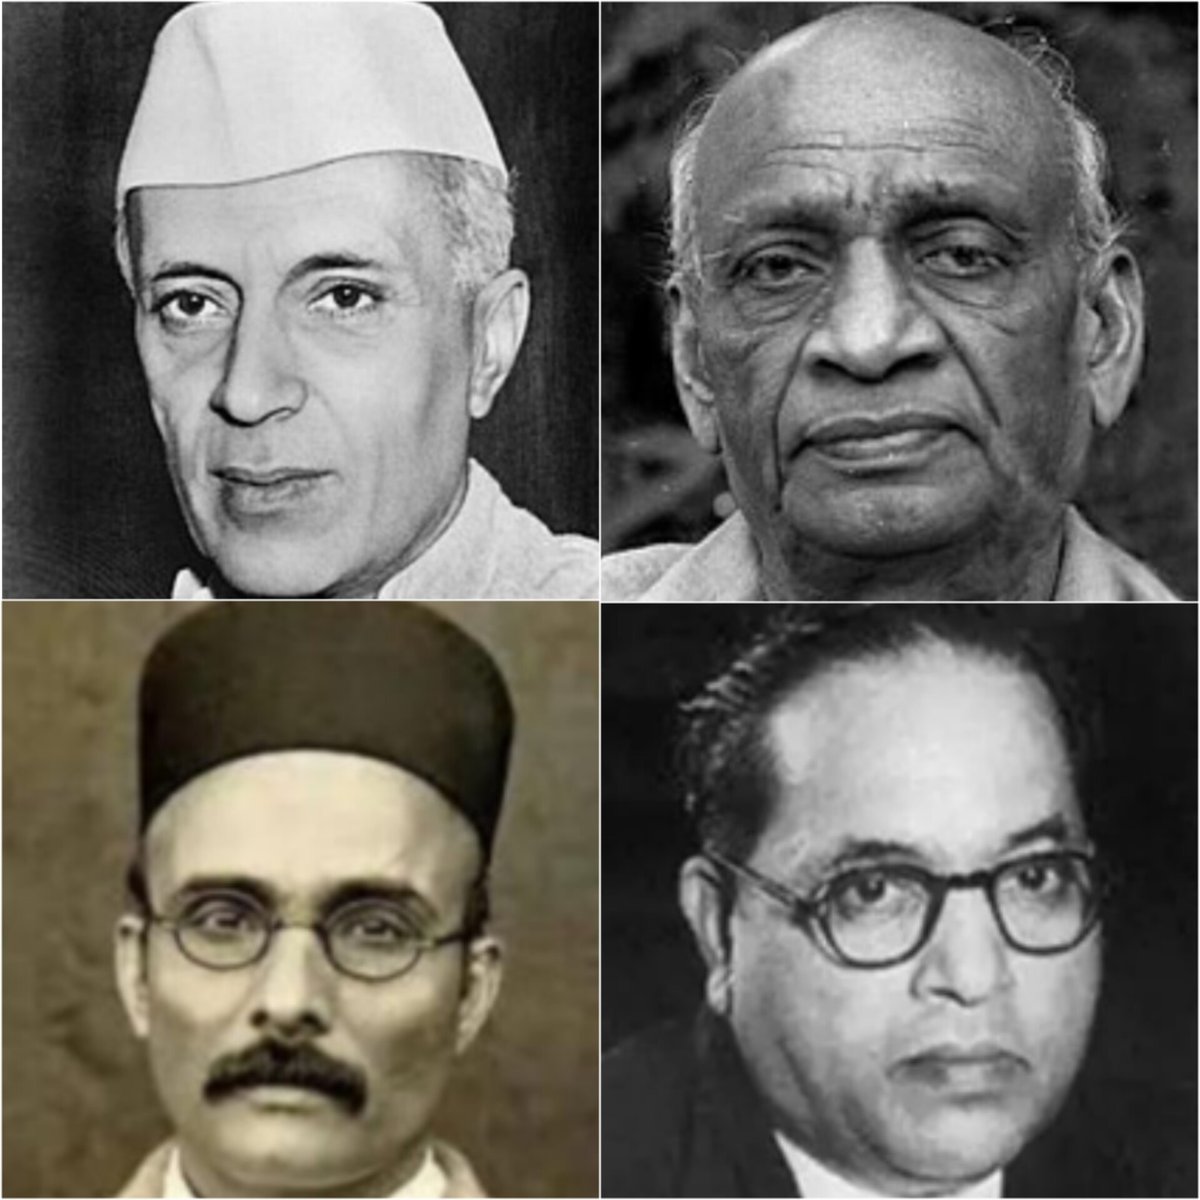 Only one of these persons benefited from Gandhi assassination. Guess who?